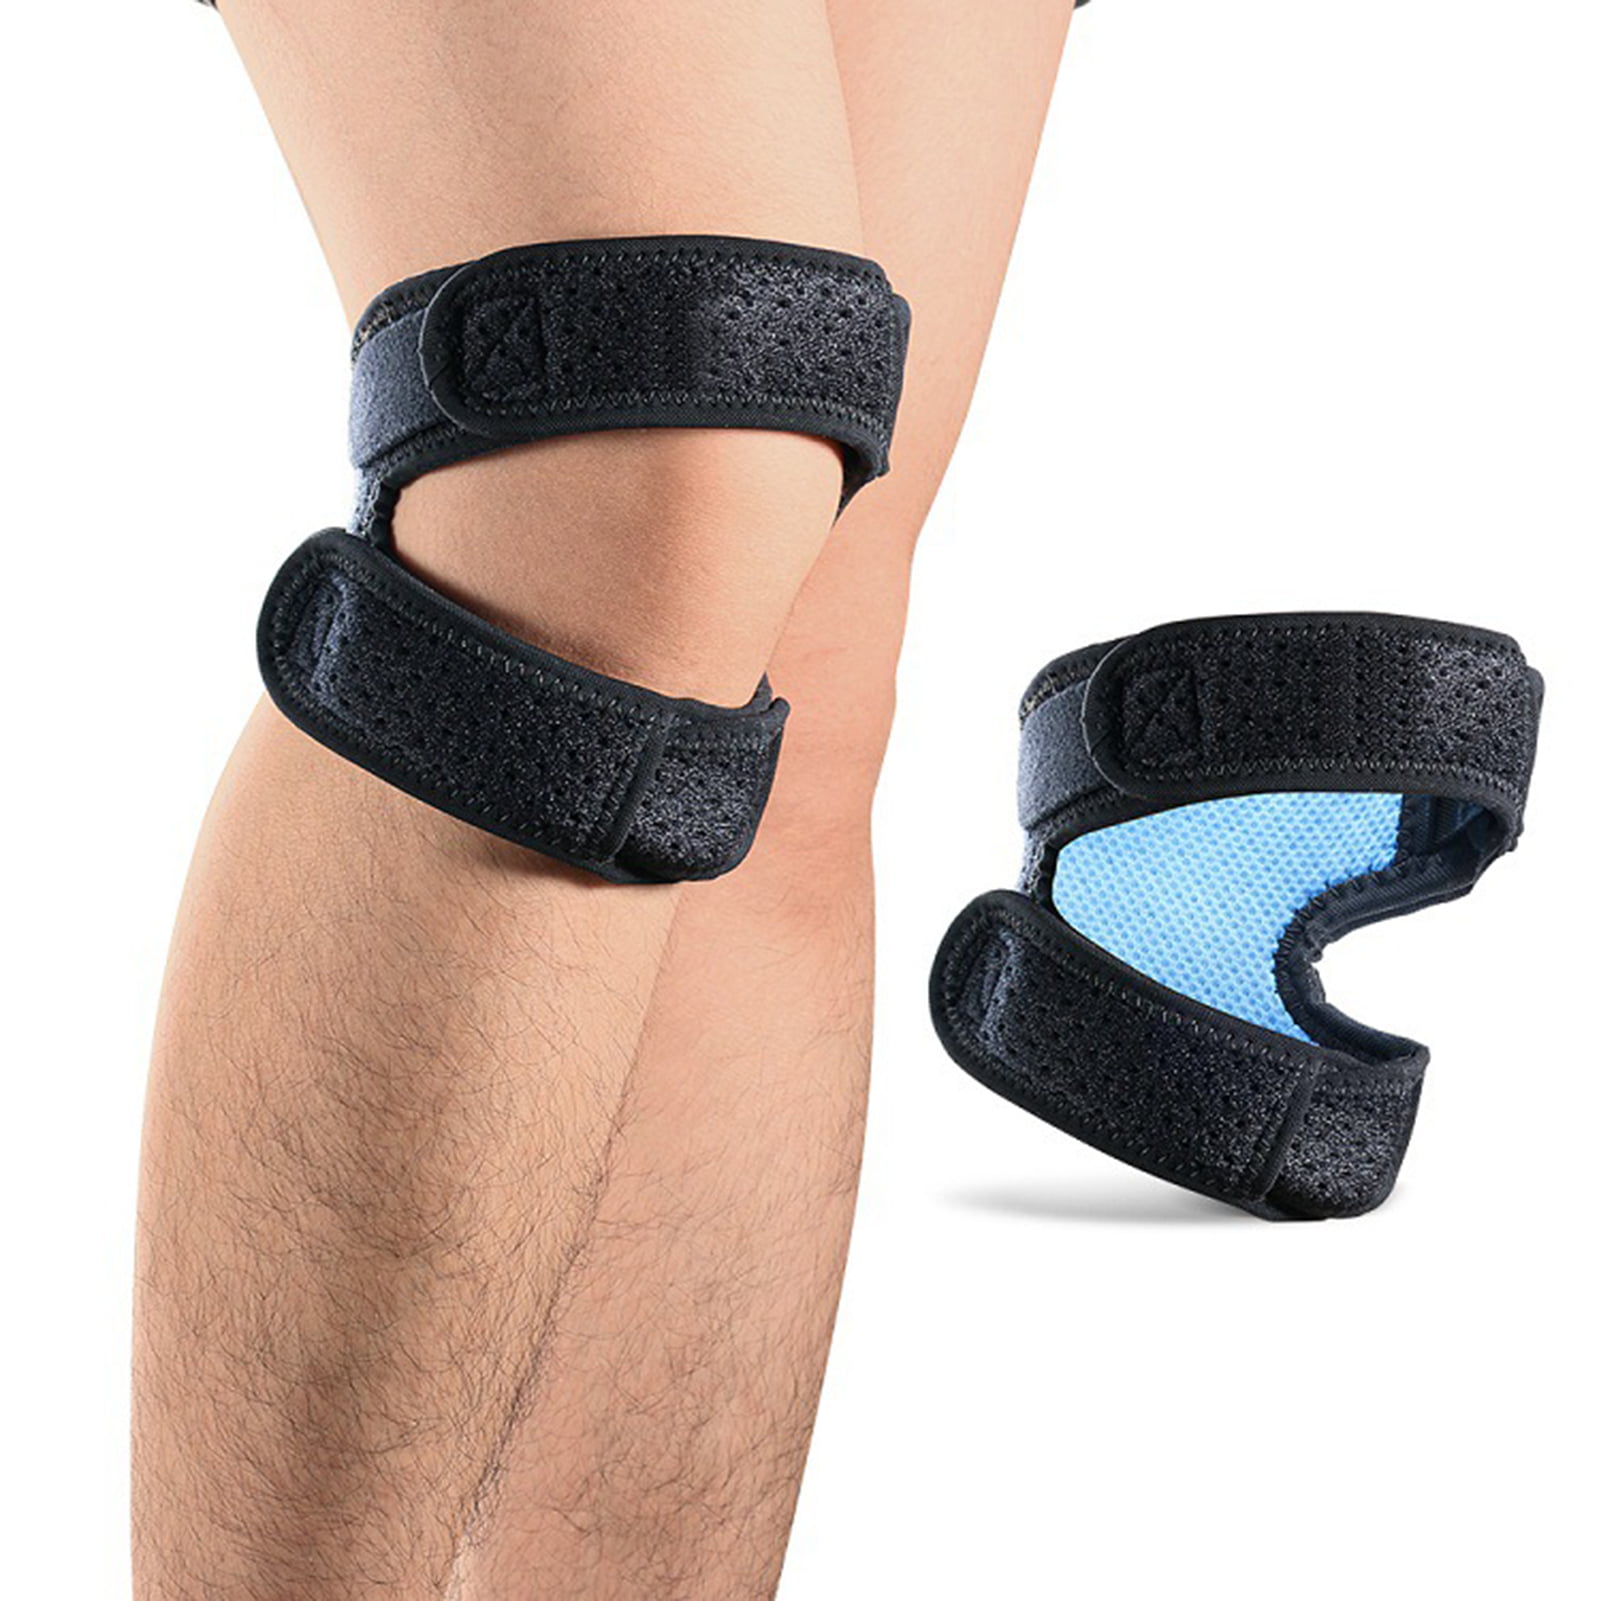 Running Injury Arthritis Single Meniscus Tear & Support Mumian Knee Compression Sleeve with Adjustable Strapping for Pain Relief Joint Pain 